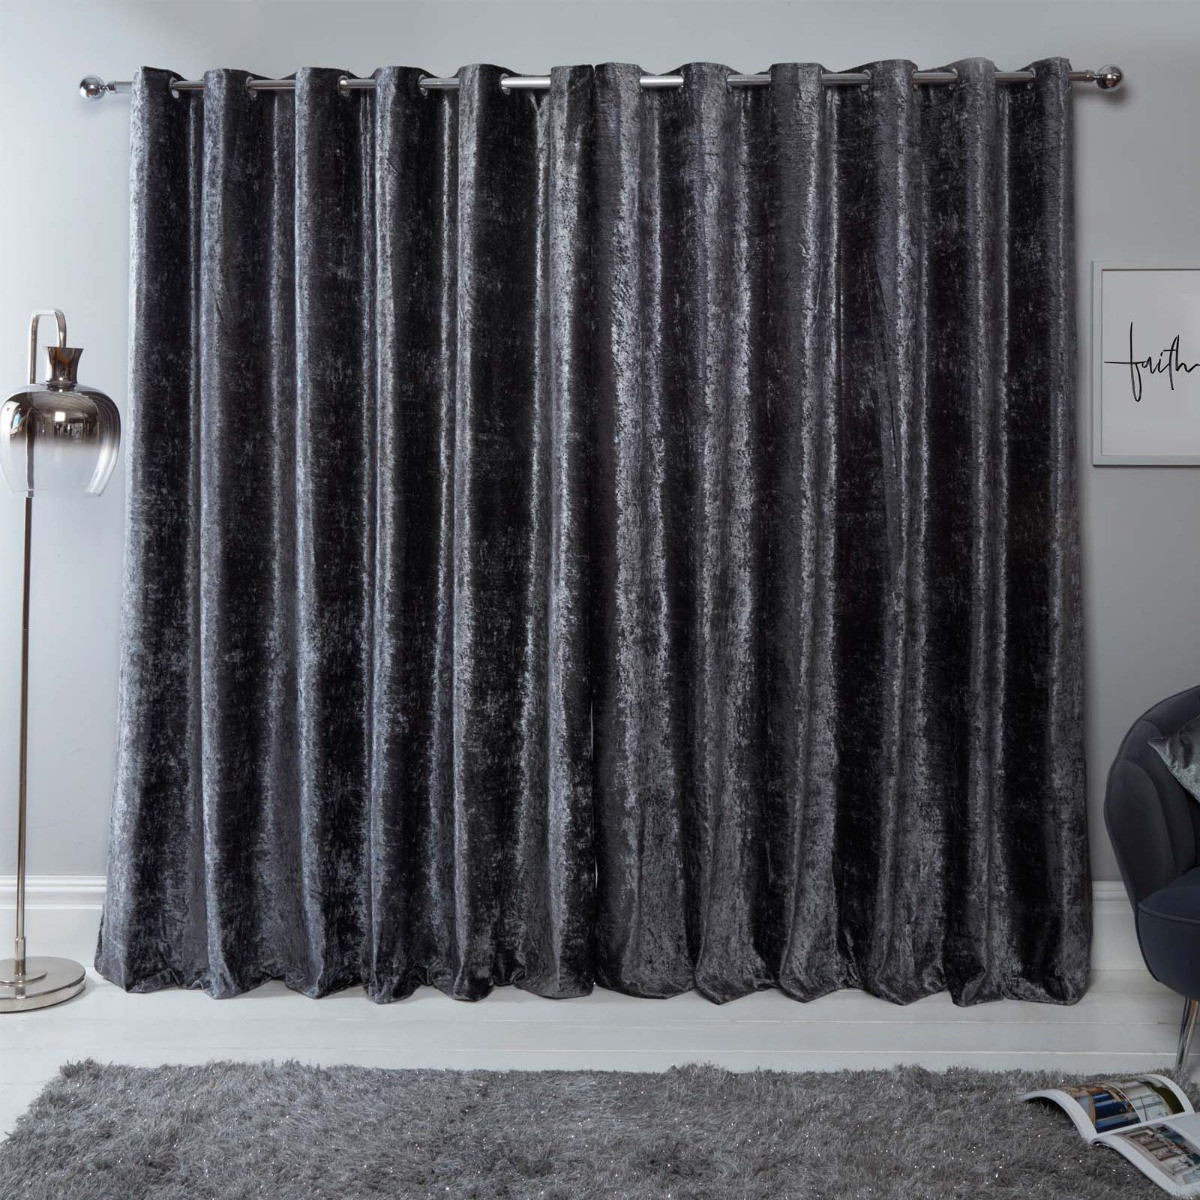 Sienna Home Crushed Velvet Eyelet Curtains - Charcoal Grey 66" x 90">